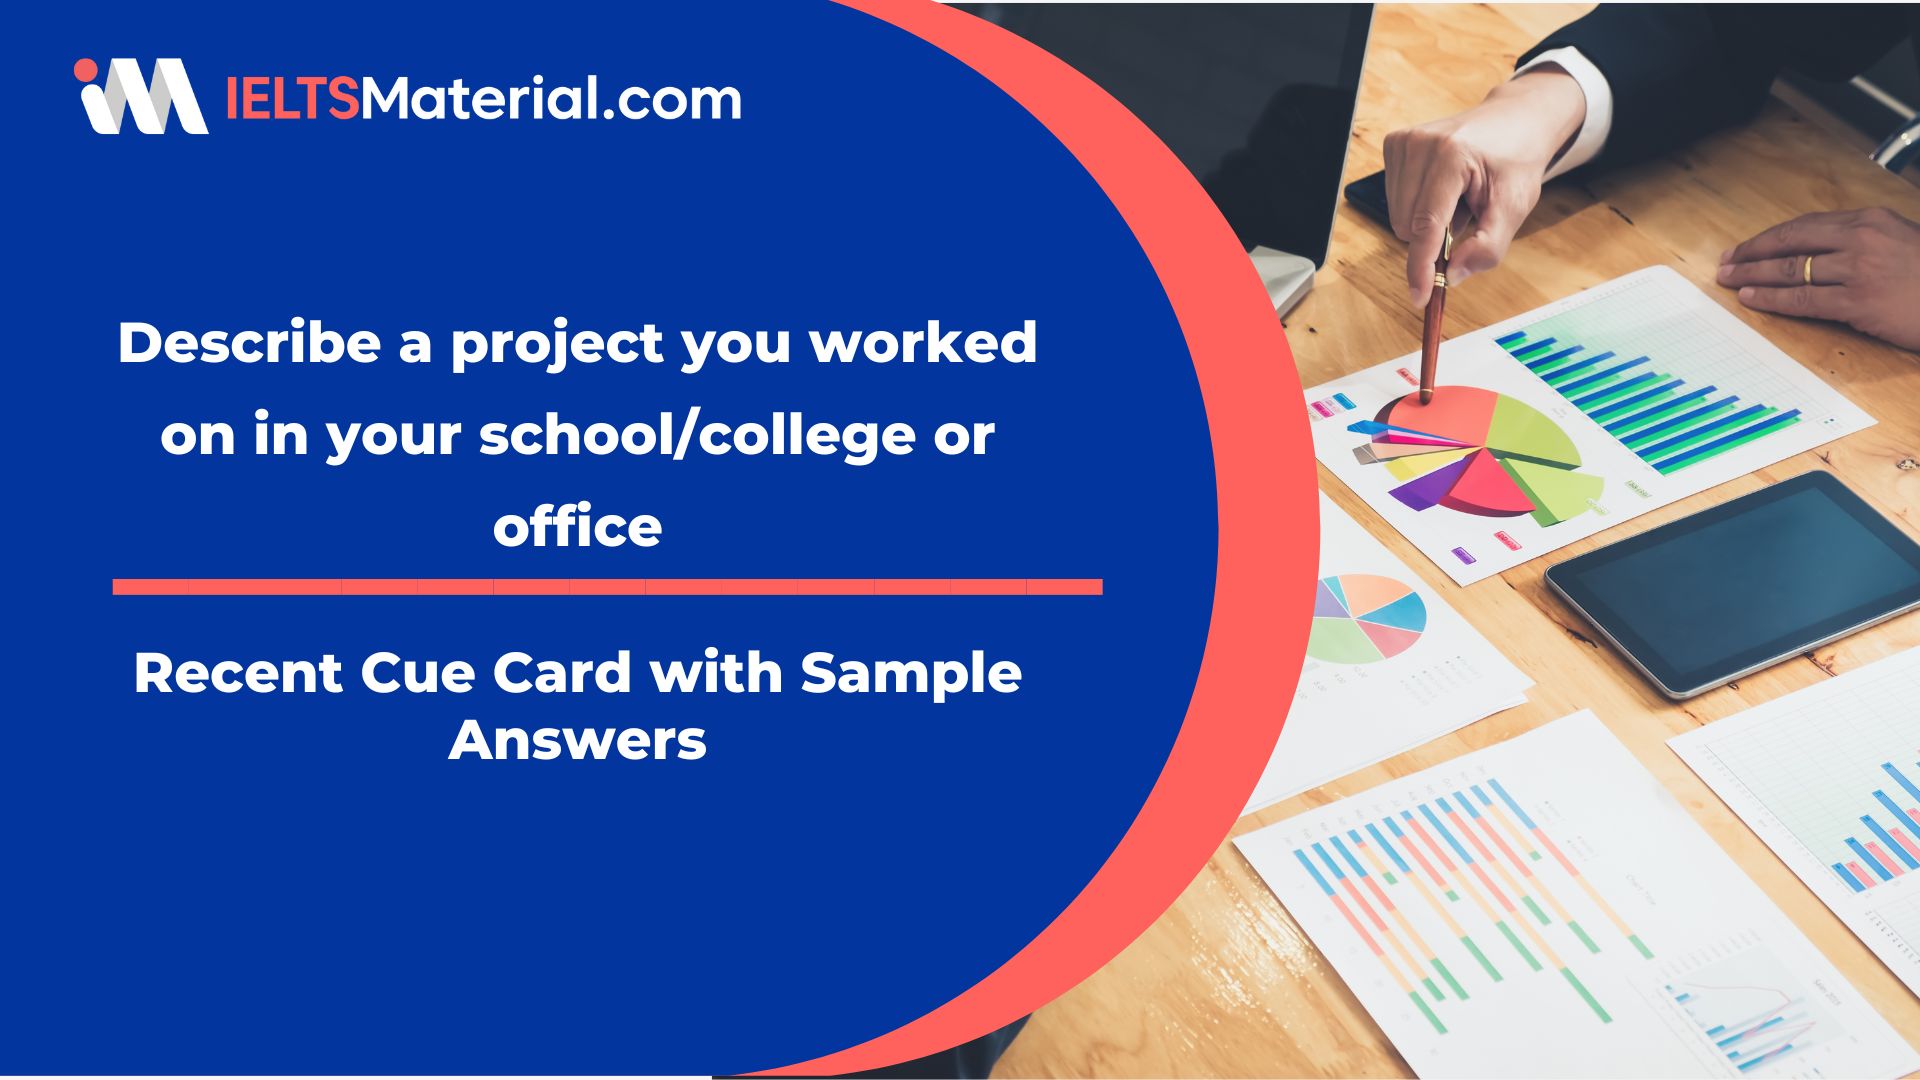 Describe a project you worked on in your school/college or office: IELTS Cue Card Samples